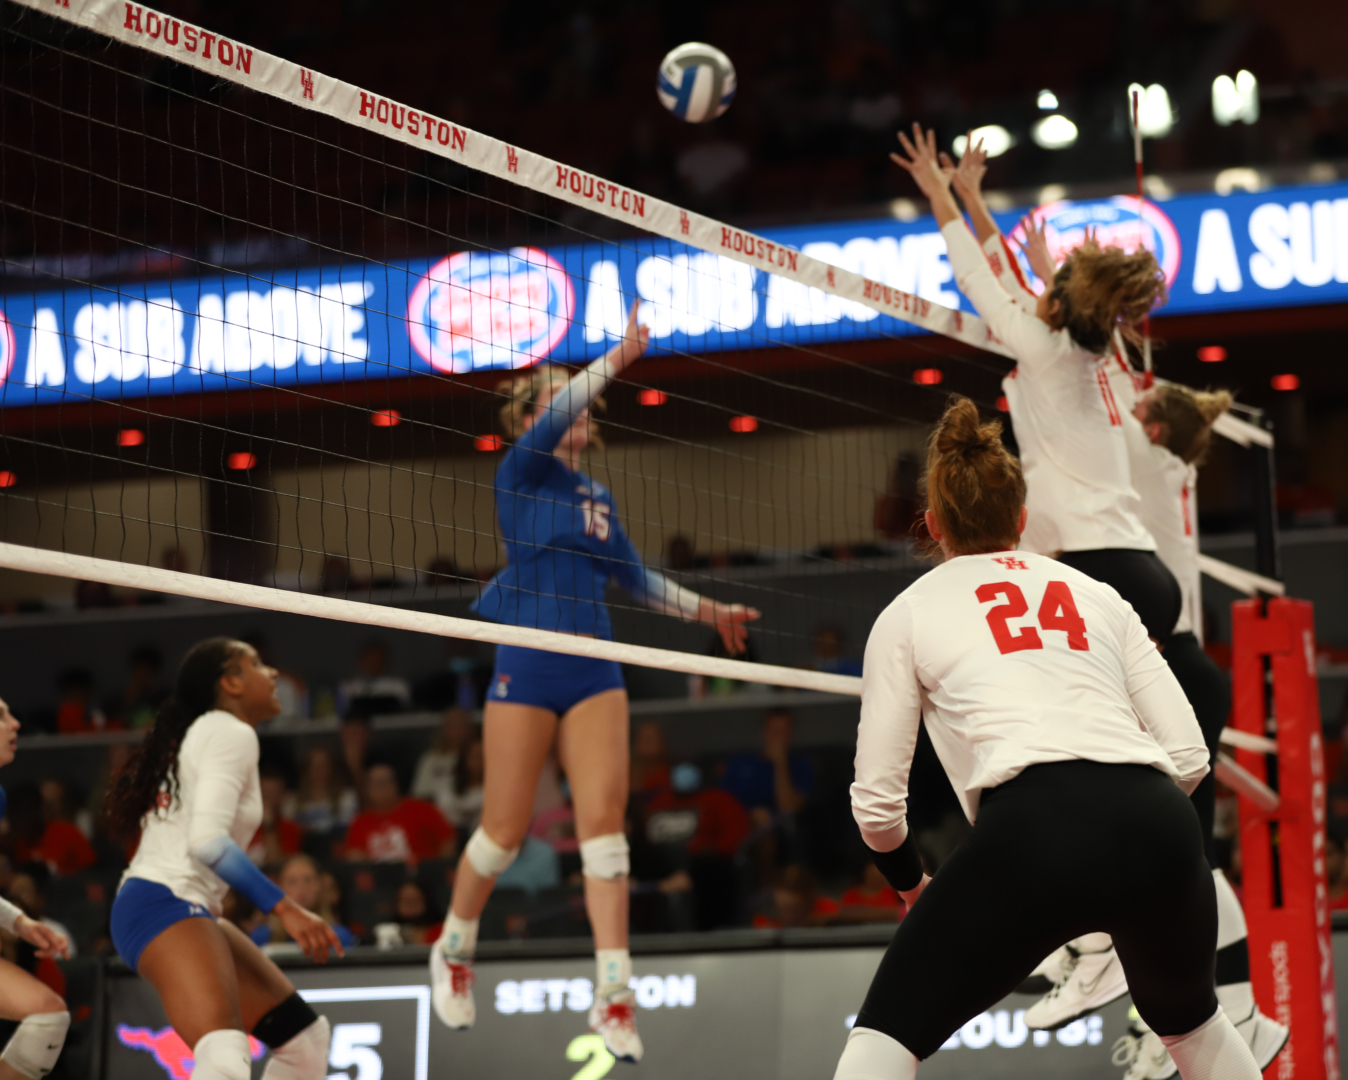 UH volleyball's seven-match win streak was snapped Sunday afternoon as the Cougars fell to SMU 3-1. | Esther Umoh/The Cougar